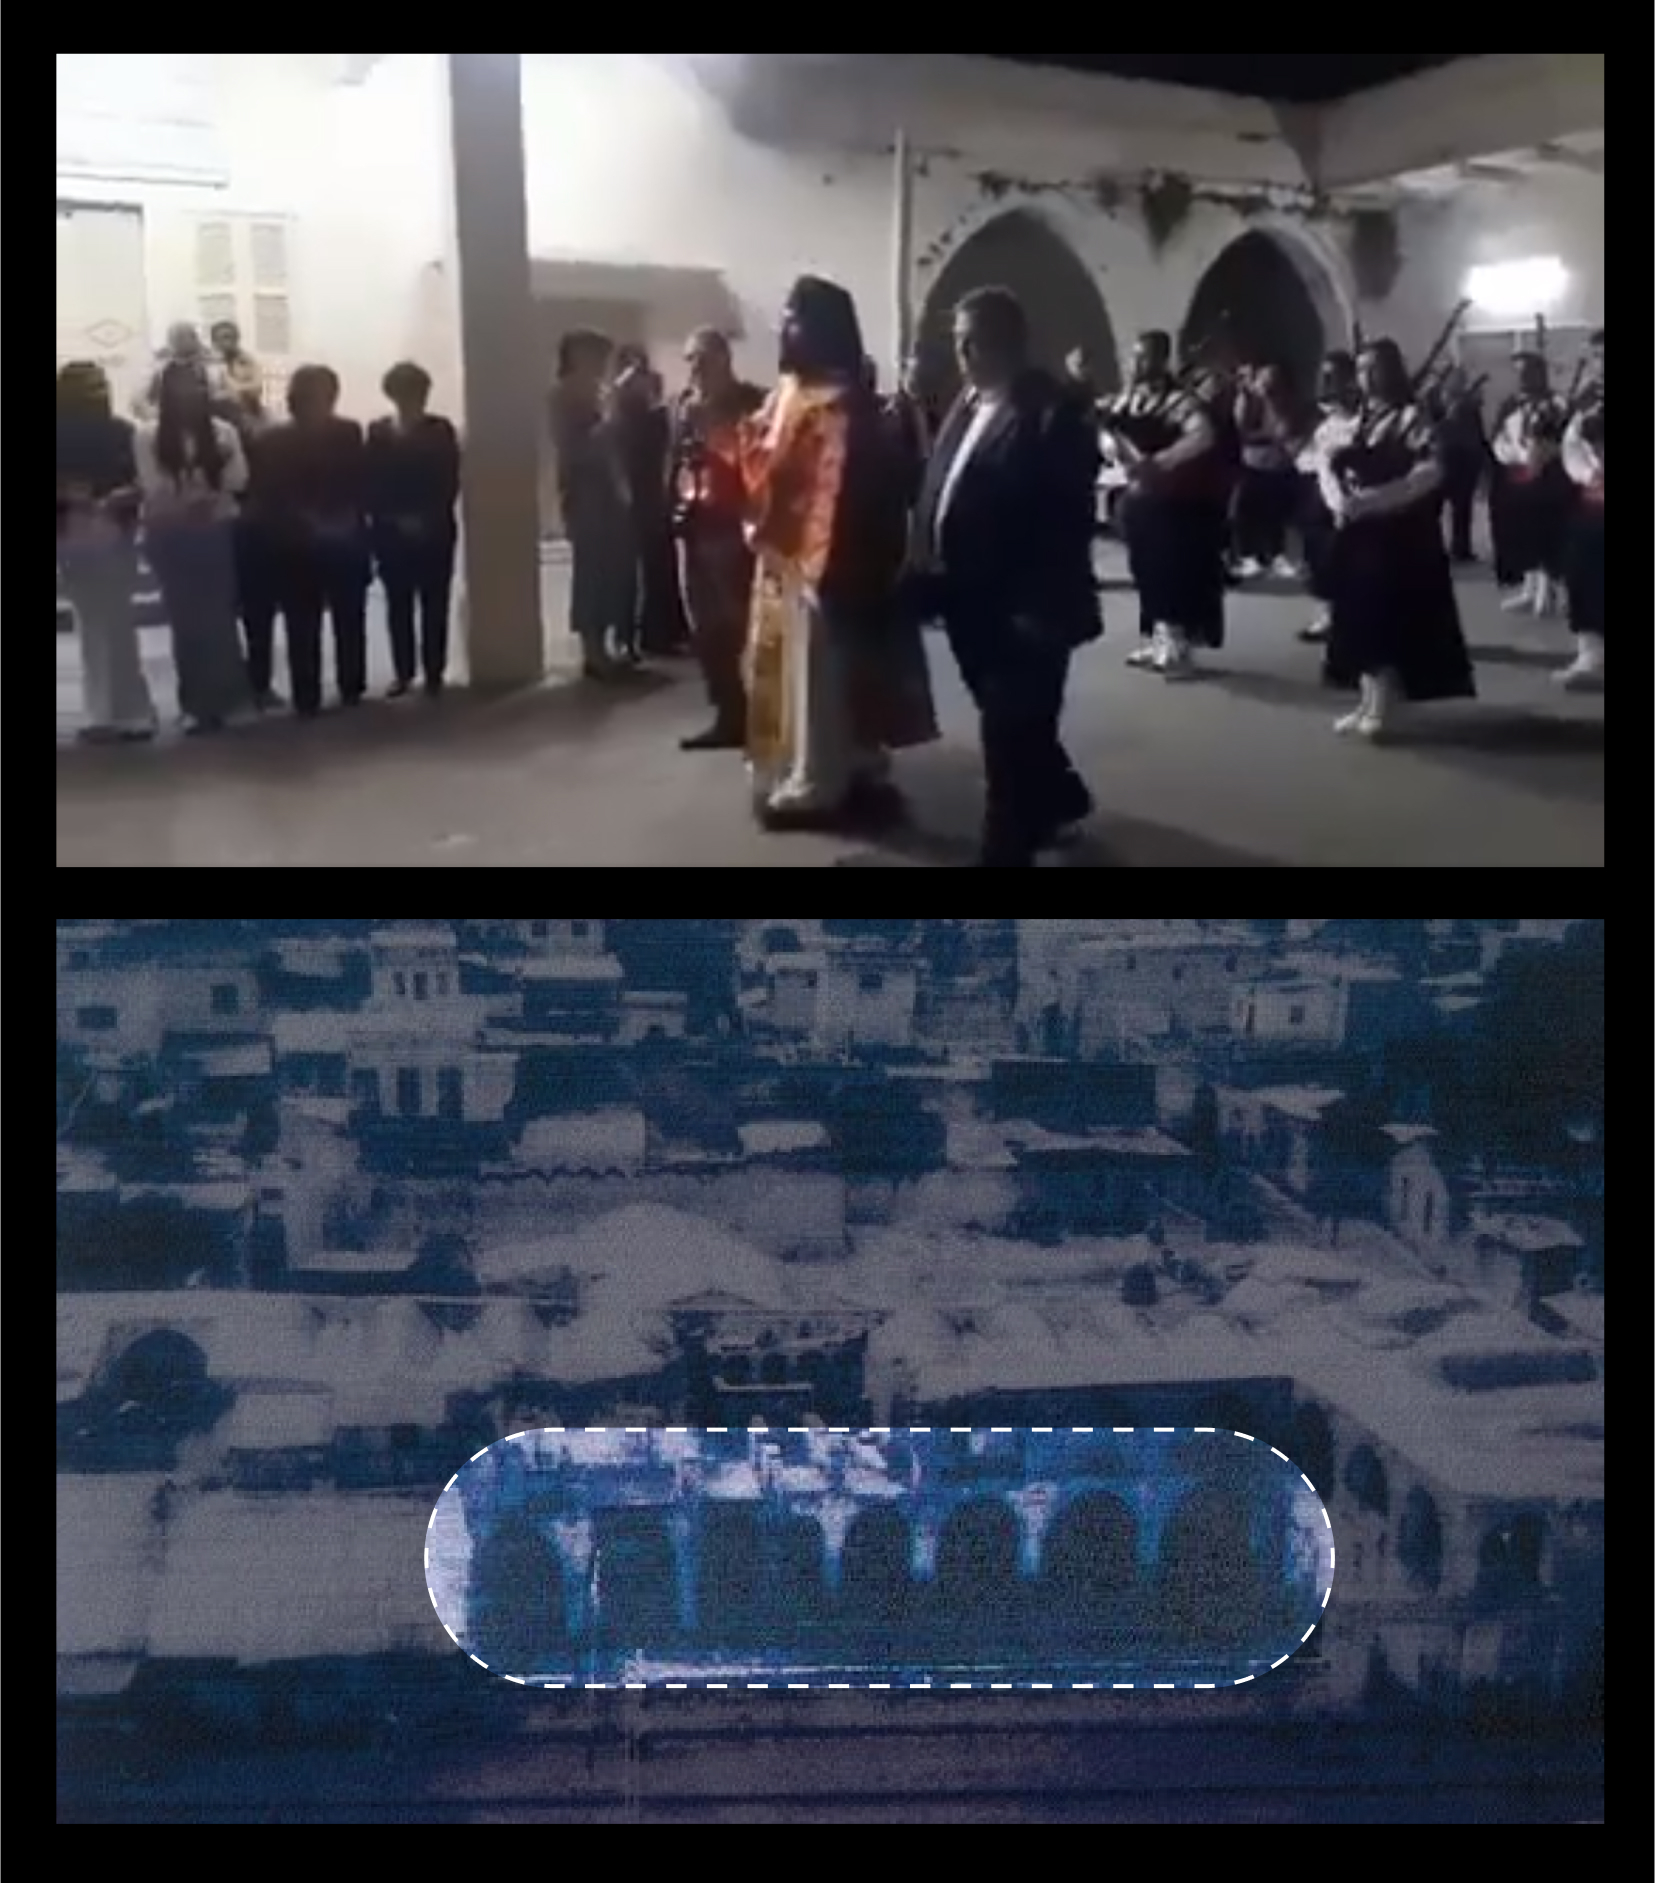 Screenshot from Facebook video of a ceremony. Images of Archaeological sites in Gaza’s Old City: Khan Al-Zait, the Old City of Gaza, and the church.